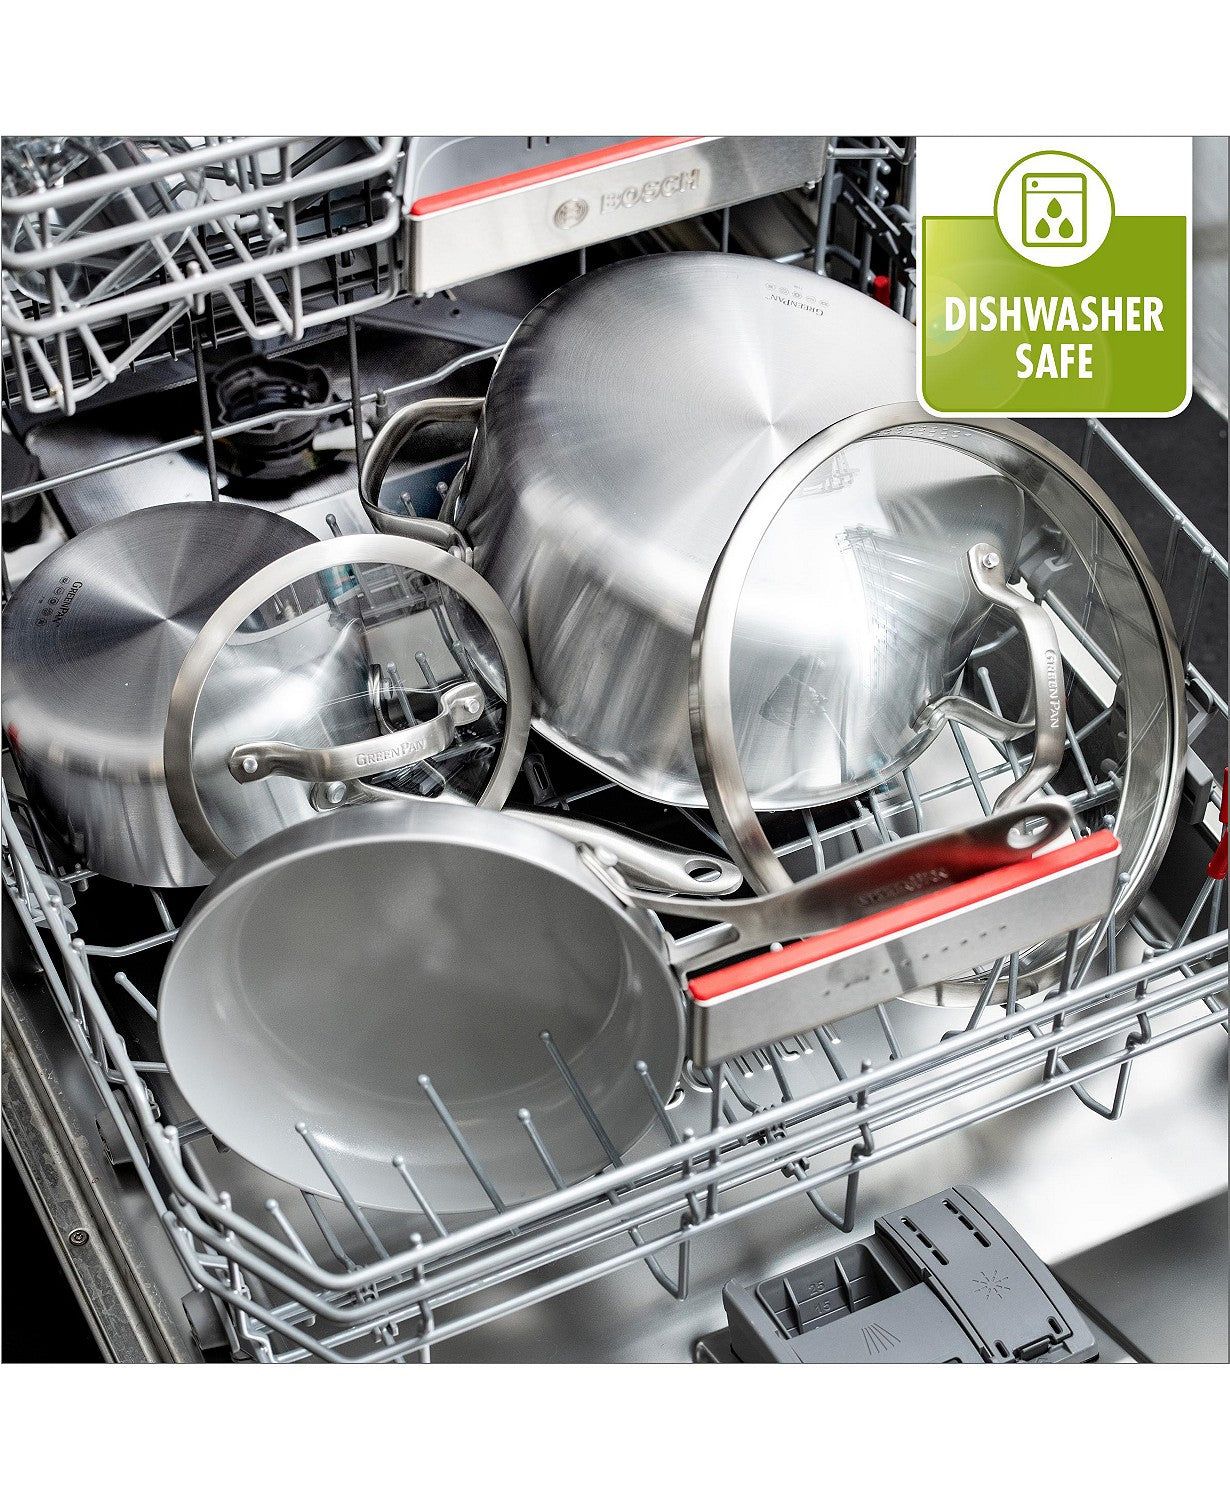 cookware in open dishwasher.